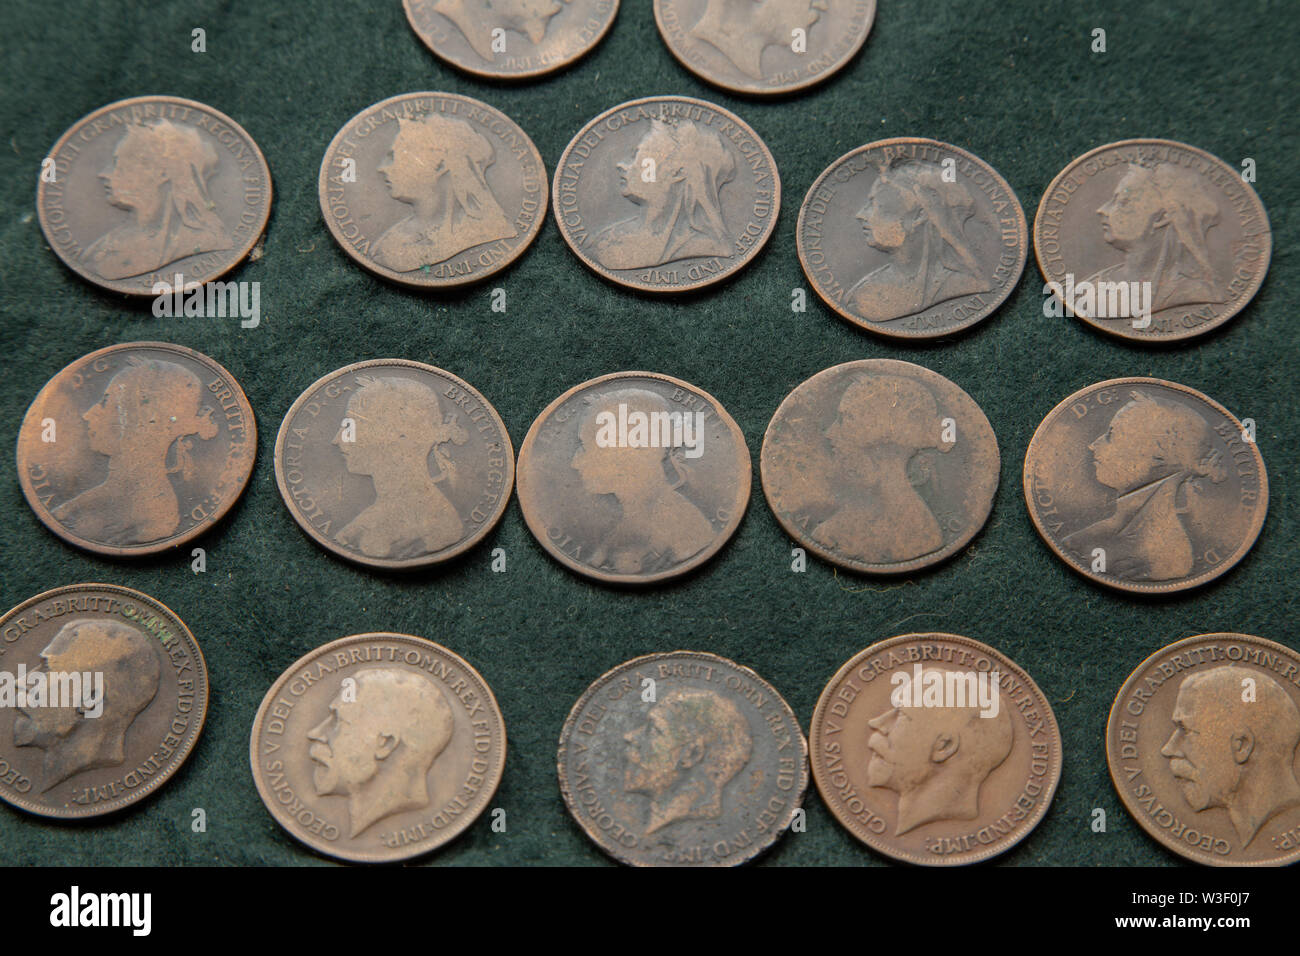 Row of old 1 pence pieces, pre-decimalisation UK Penny Queen Victoria Stock Photo